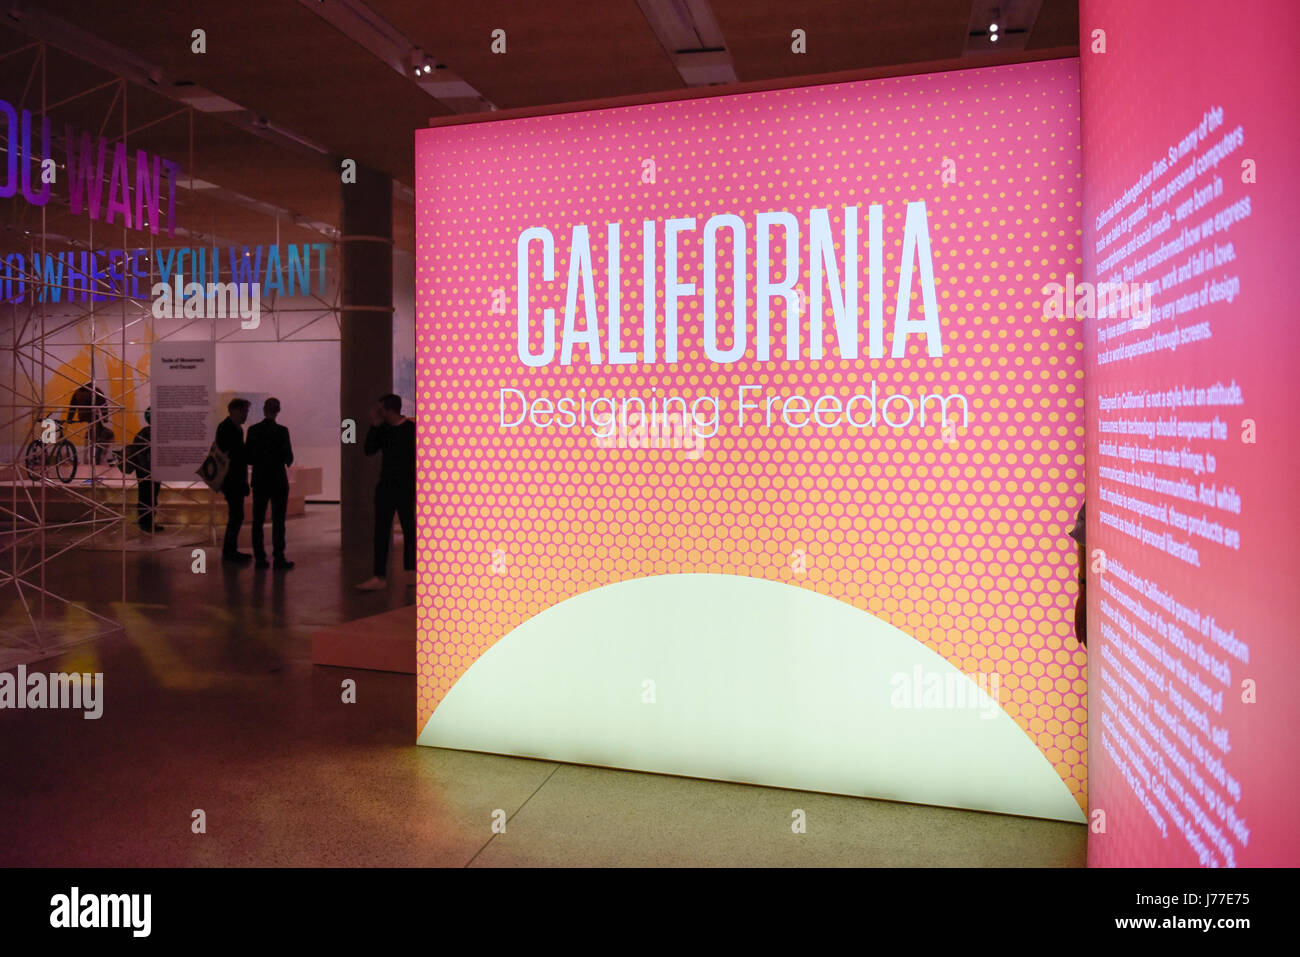 London, UK. 23rd May, 2017. Press preview of "California Designing Freedom", an exhibition at the Design Museum celebrating the history of products designed in California from the 1960s to the current day. The exhibition runs from 24 May to 15 October 2017. Credit: Stephen Chung/Alamy Live News Stock Photo